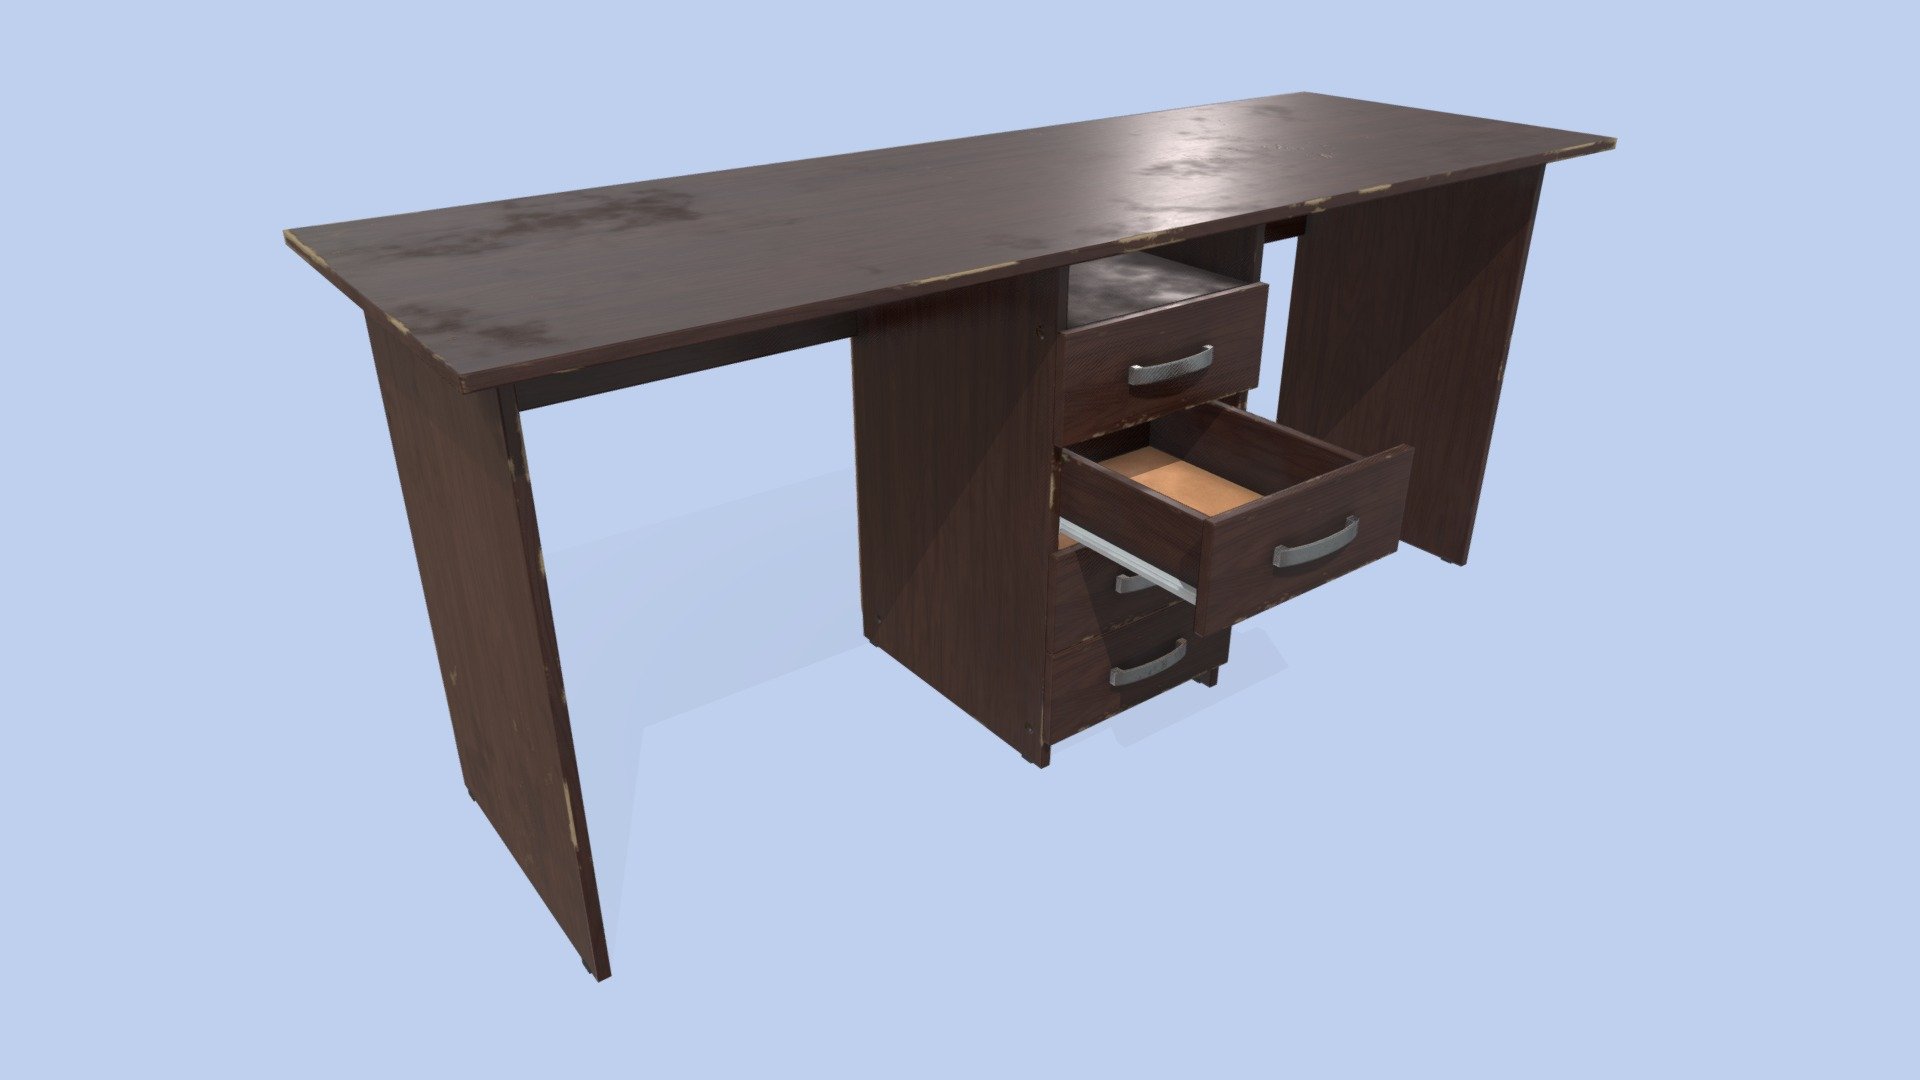 Game ready low-poly Old Desk model with PBR textures for game engines/renderers.

This product is intended for game/real time/background use. This model is not intended for subdivision. Geometry is triangulated. Model unwrapped manually. All materials and objects named appropriately. Scaled to approximate real world size(Height: 750mm/29.5 inches, Width: 1748mm/68.8 inches, Depth: 600mm/23.6 inches). Tested in Marmoset Toolbag 3. Tested in Unreal Engine 4. Tested in Unity. No special plugins needed. .obj and .fbx versions exported from Blender 2.83.

4096x4096 textures in png format:
- General PBR Metallic/Roughness  textures: BaseColor, Metallic, Roughness, Normal(DirectX), Normal(OpenGL), AO;
- Unity Textures: Albedo, MetallicSmoothness, Normal, AO;
- Unreal Engine 4 textures: BaseColor, OcclusionRoughnessMetallic, Normal;
- PBR Specular/Glossiness textures: Diffuse, Specular, Glossiness, Normal(DirectX), Normal(OpenGL), AO.

Also included clean variant of textures
 - Old Desk - Buy Royalty Free 3D model by AshMesh 3d model